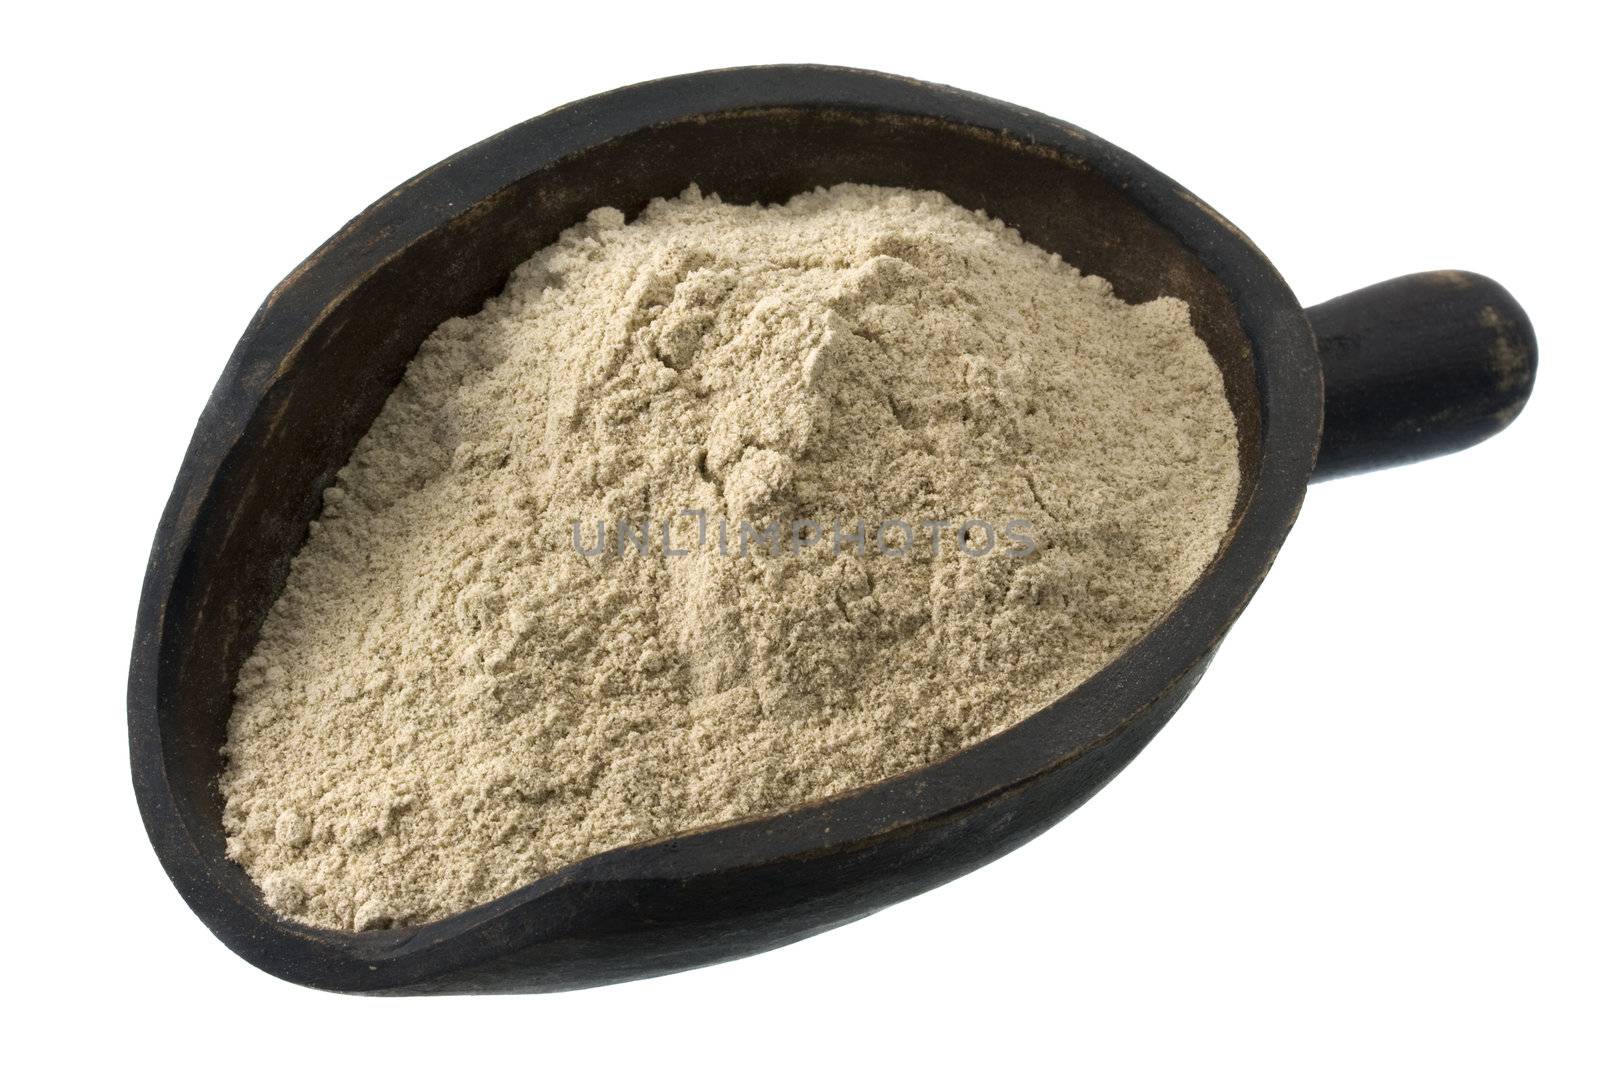 gluten free buckwheat flour on a rustic wooden scoop, isolated on white